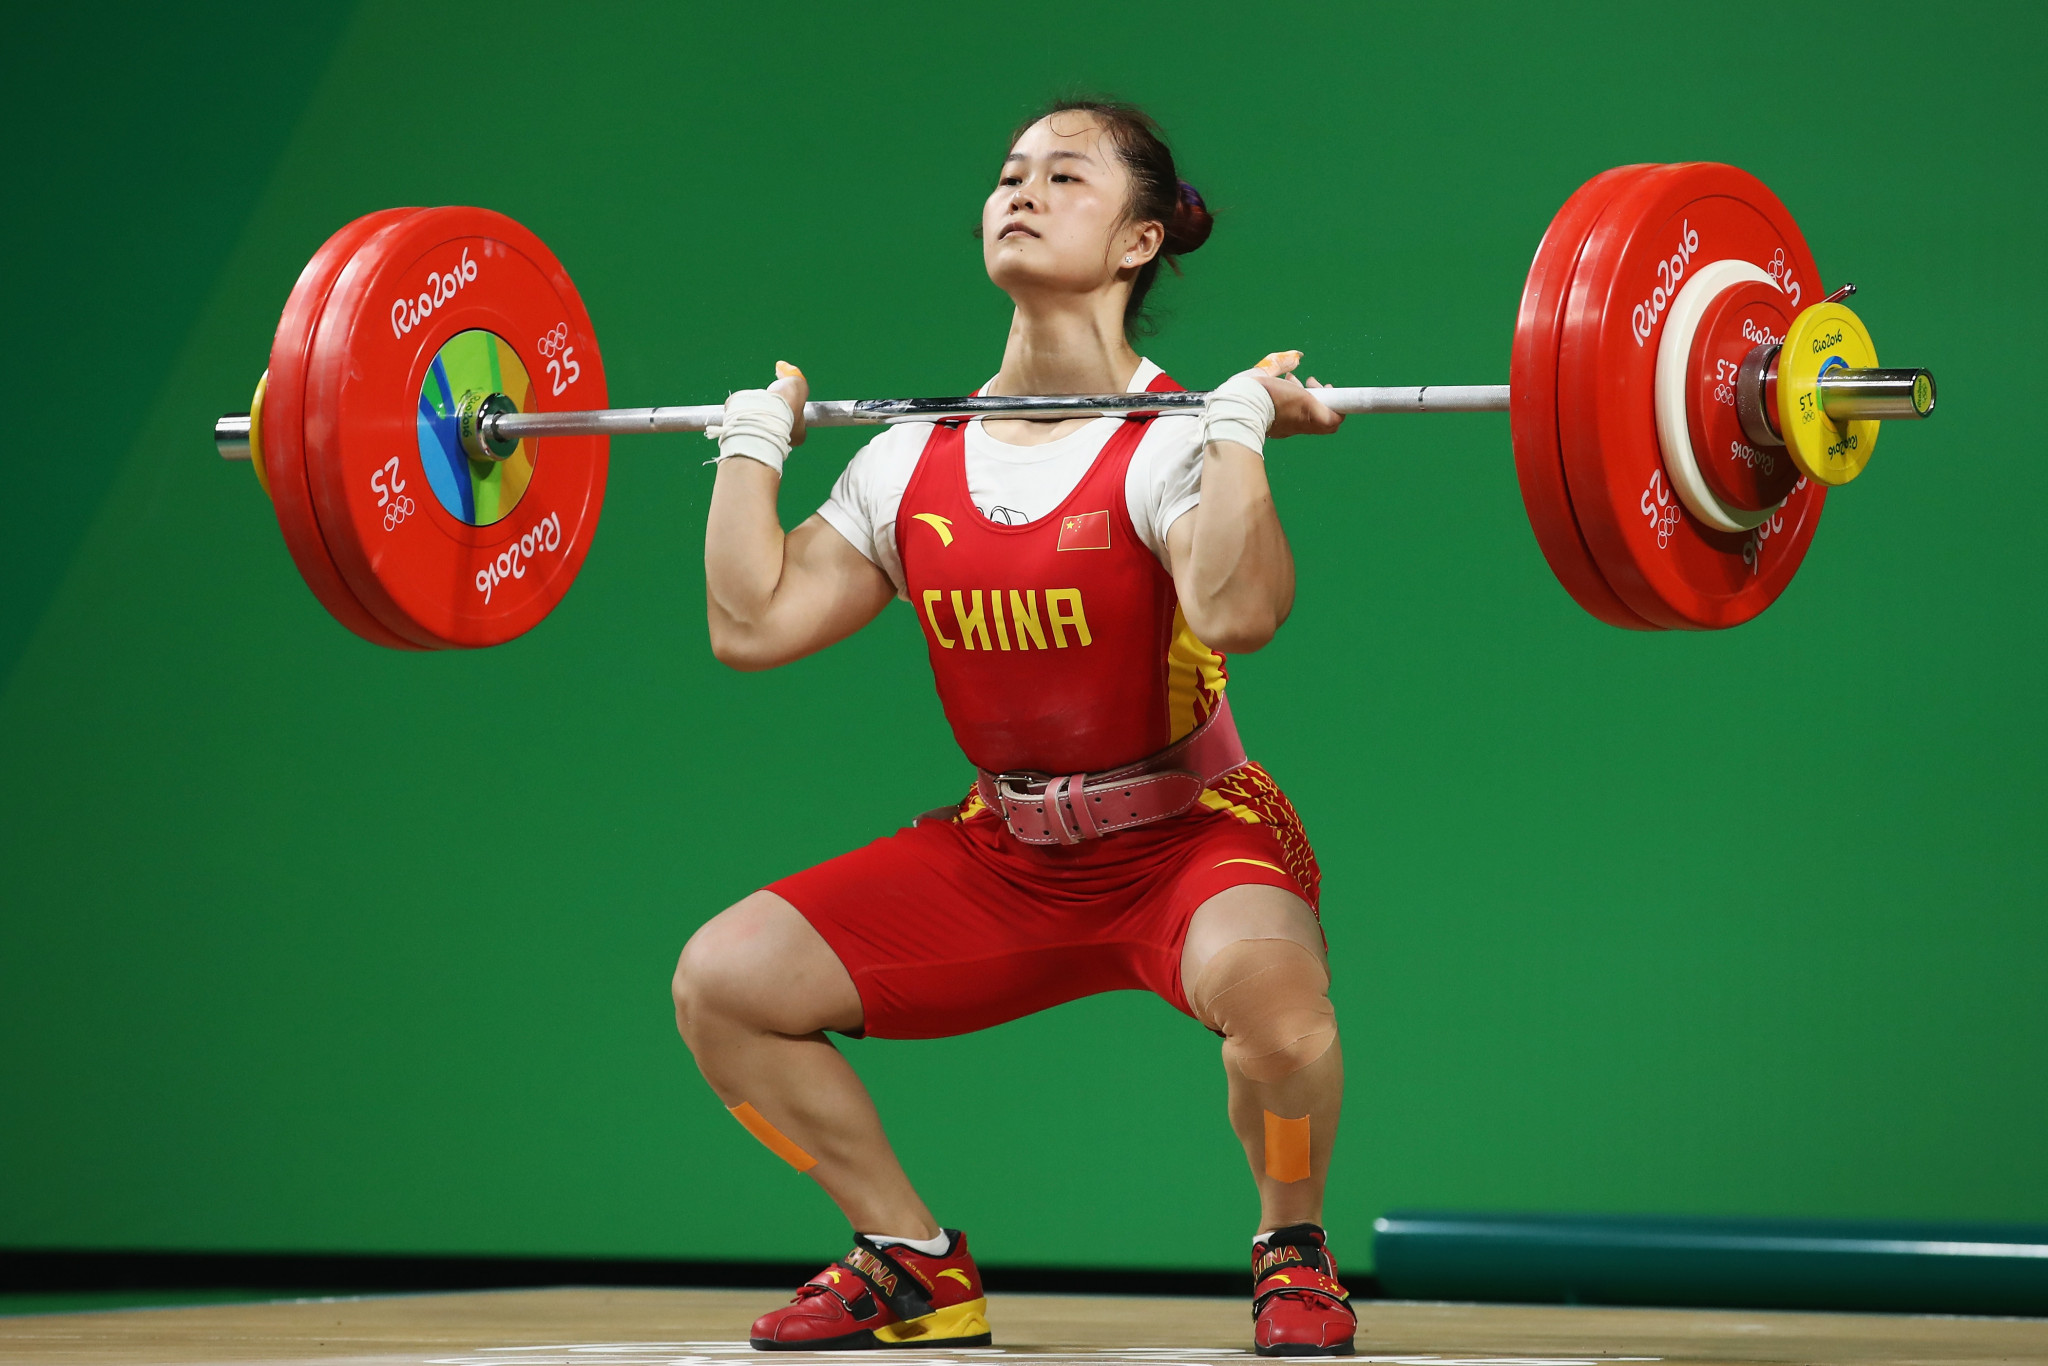 China’s Deng Wei broke her world records in the snatch, clean and jerk and total to cruise to victory in the women’s 64 kilograms category at the Asian Weightlifting Championships in Ningbo in China today ©Getty Images